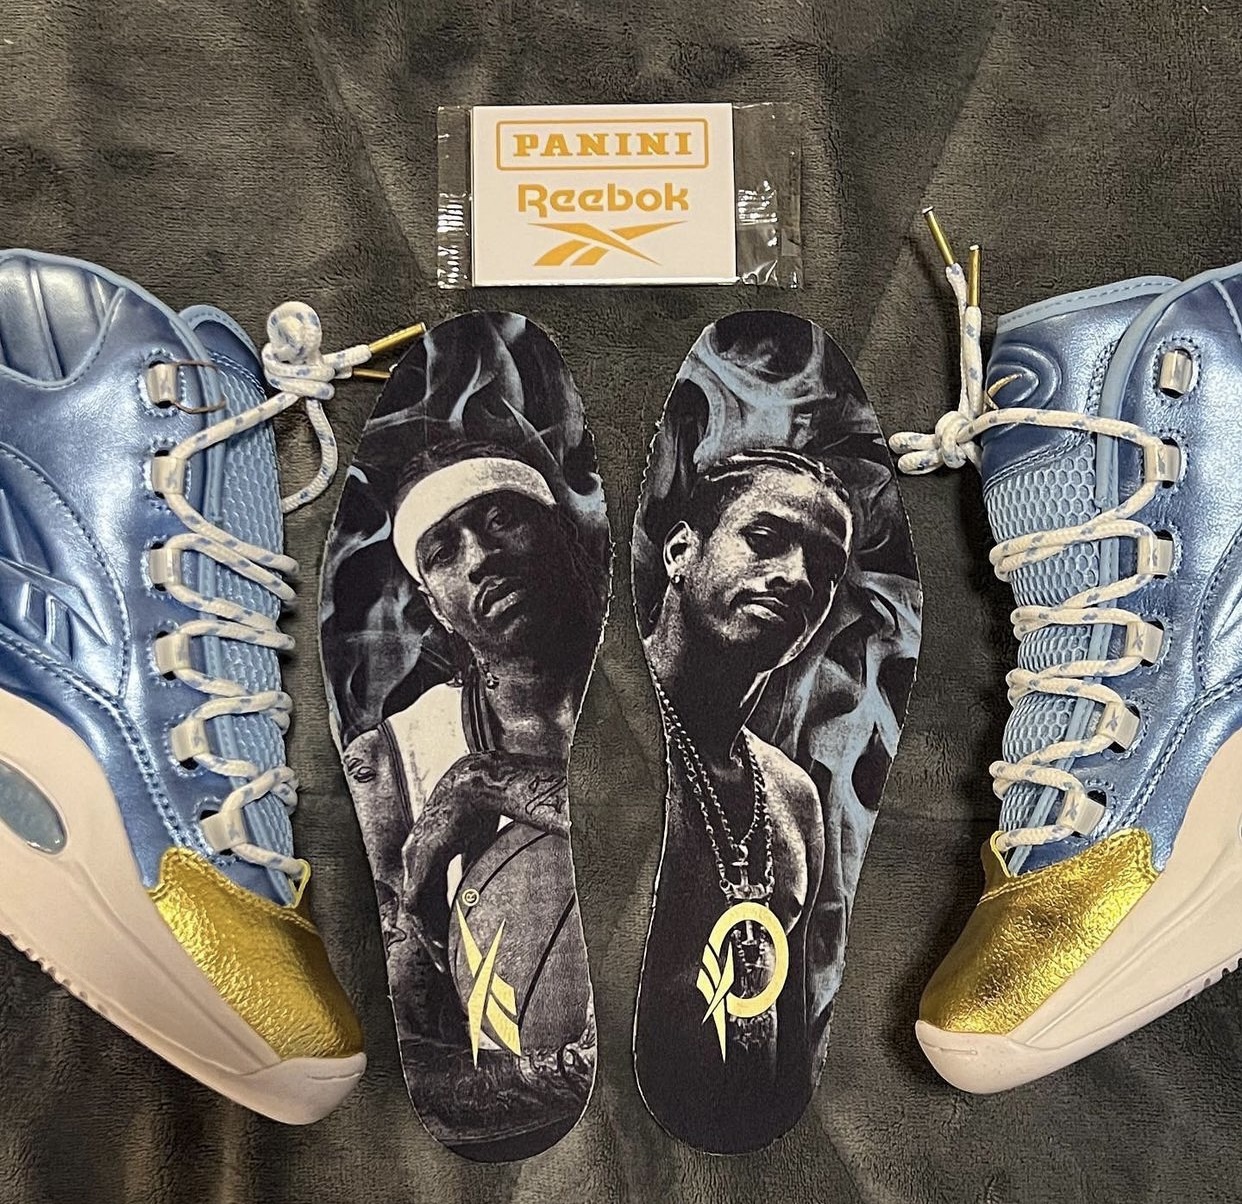 Panini Reebok Question Mid Blue Gold Friends and Family Exclusive